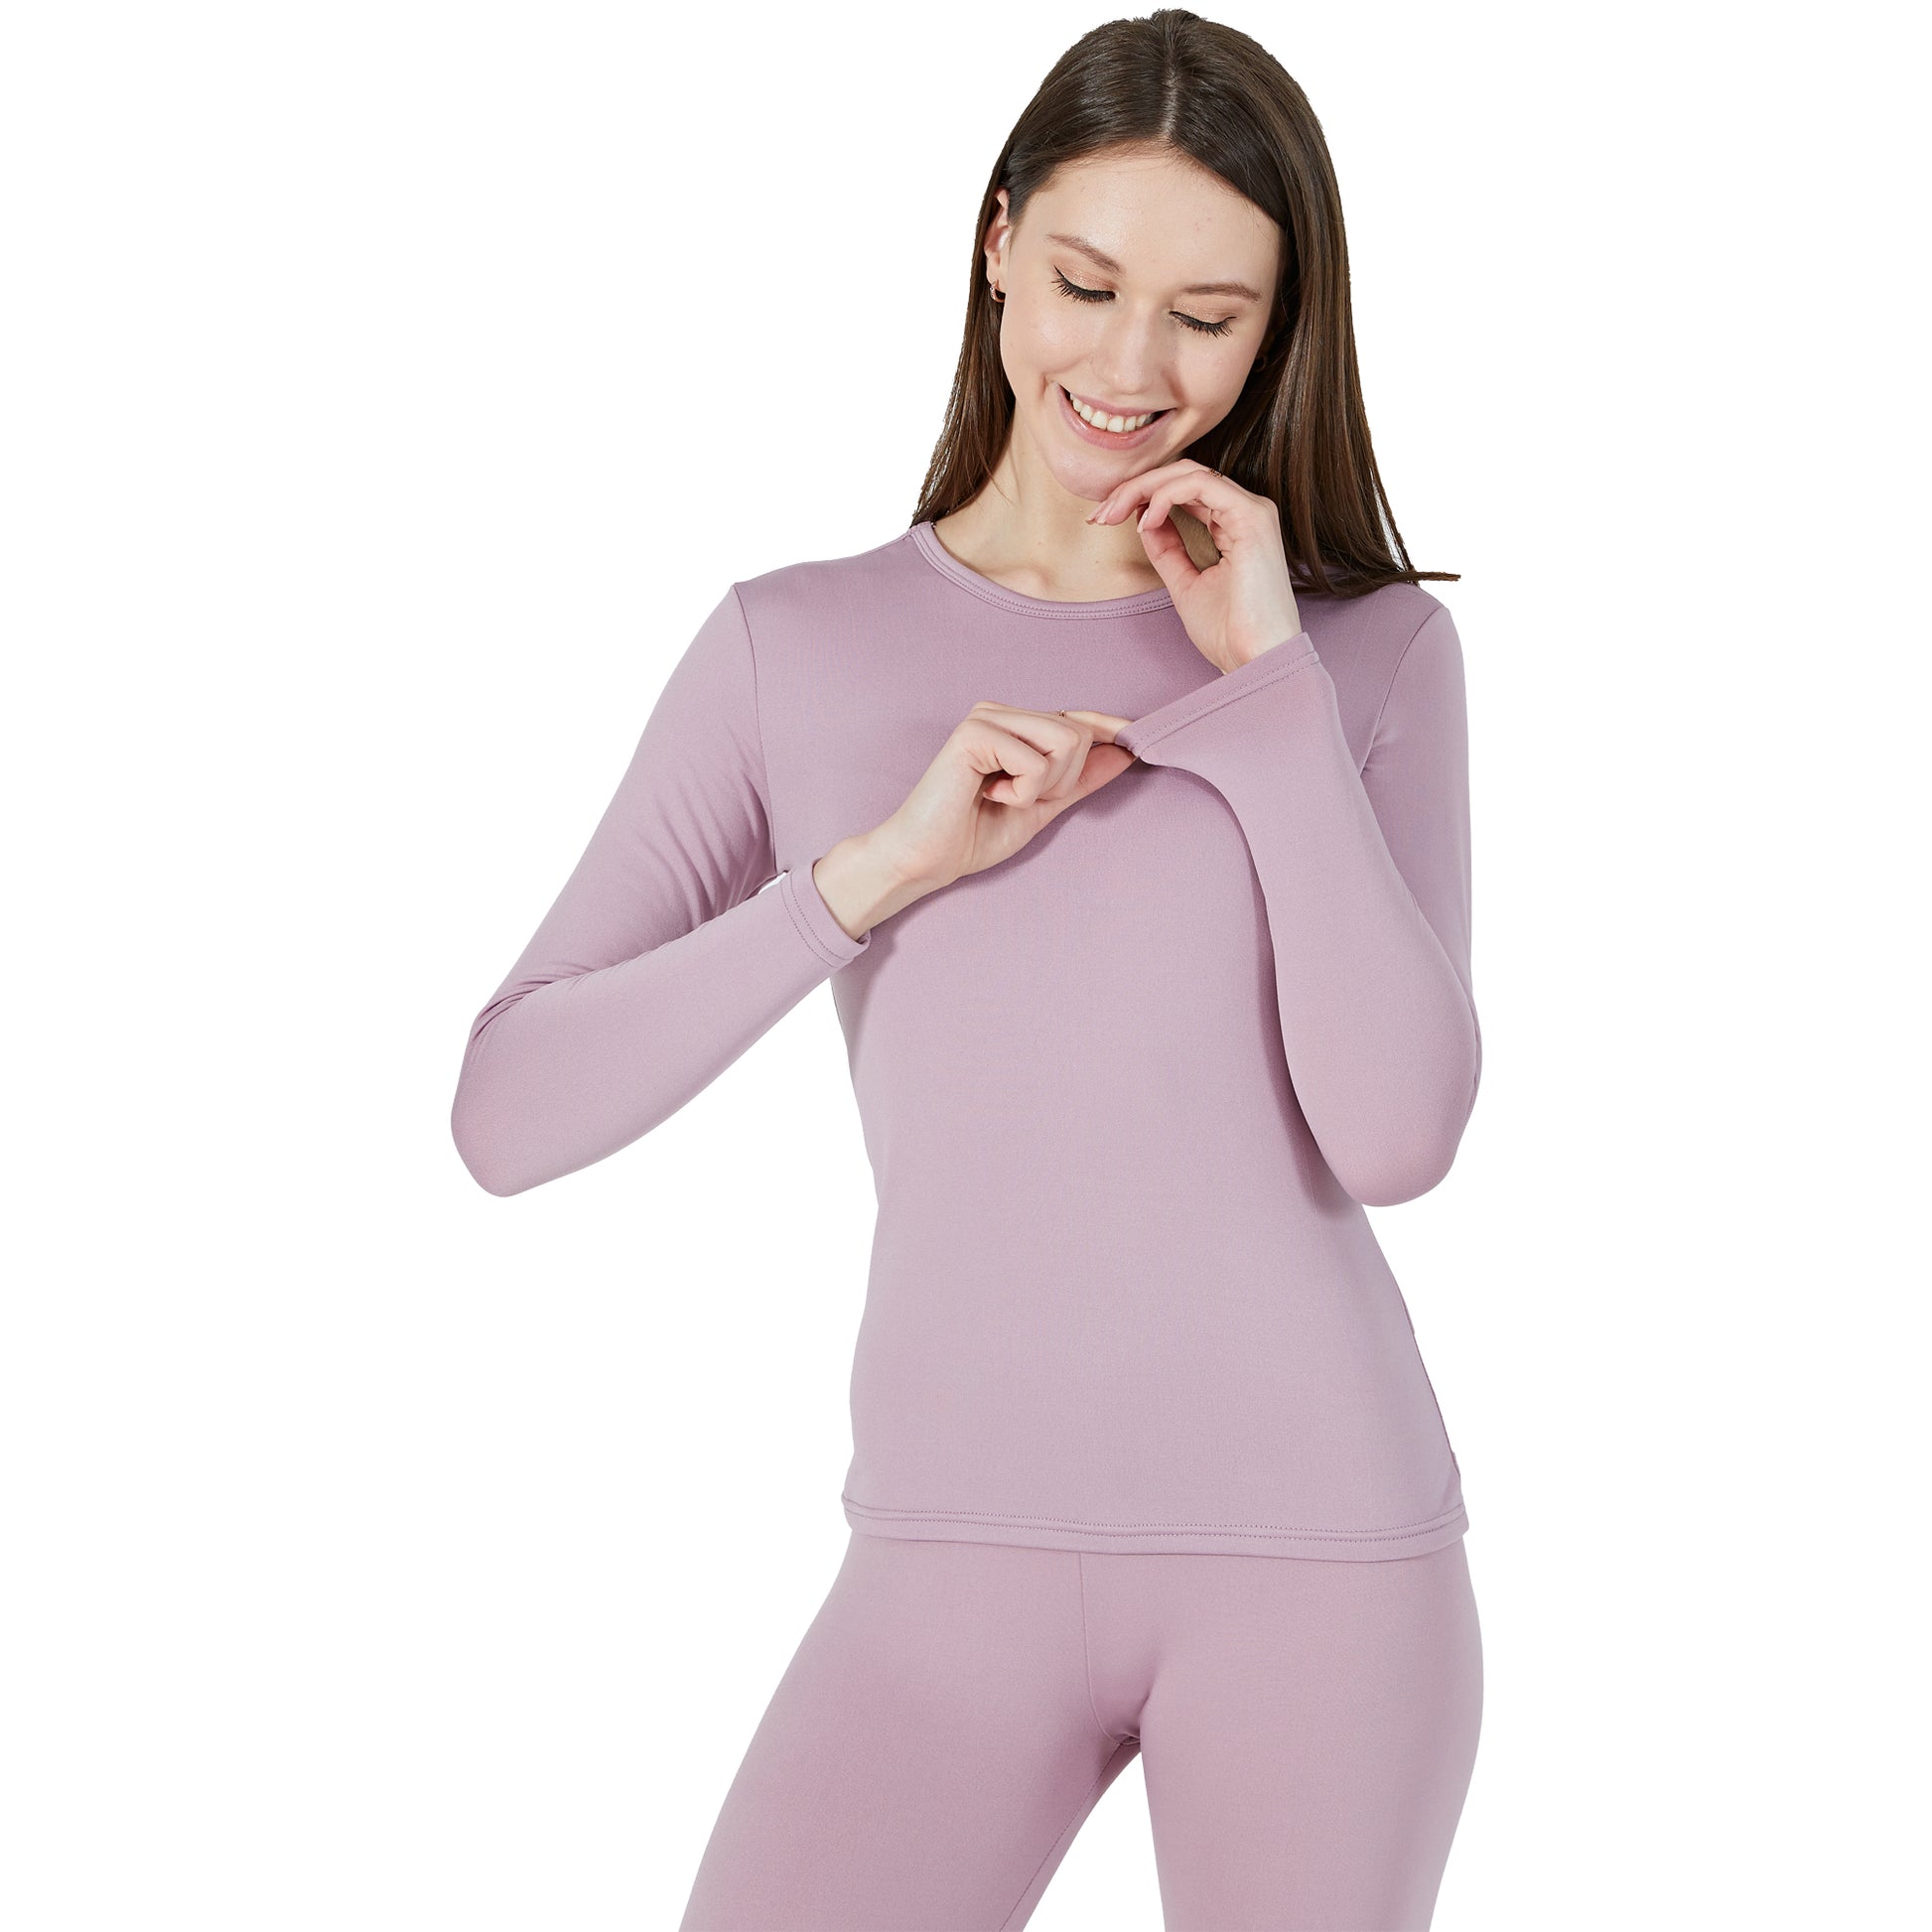 Shoppers Love This 'Super Soft and Stretchy' Thermal Underwear Set So Much  That They're Wearing It at Home, Too